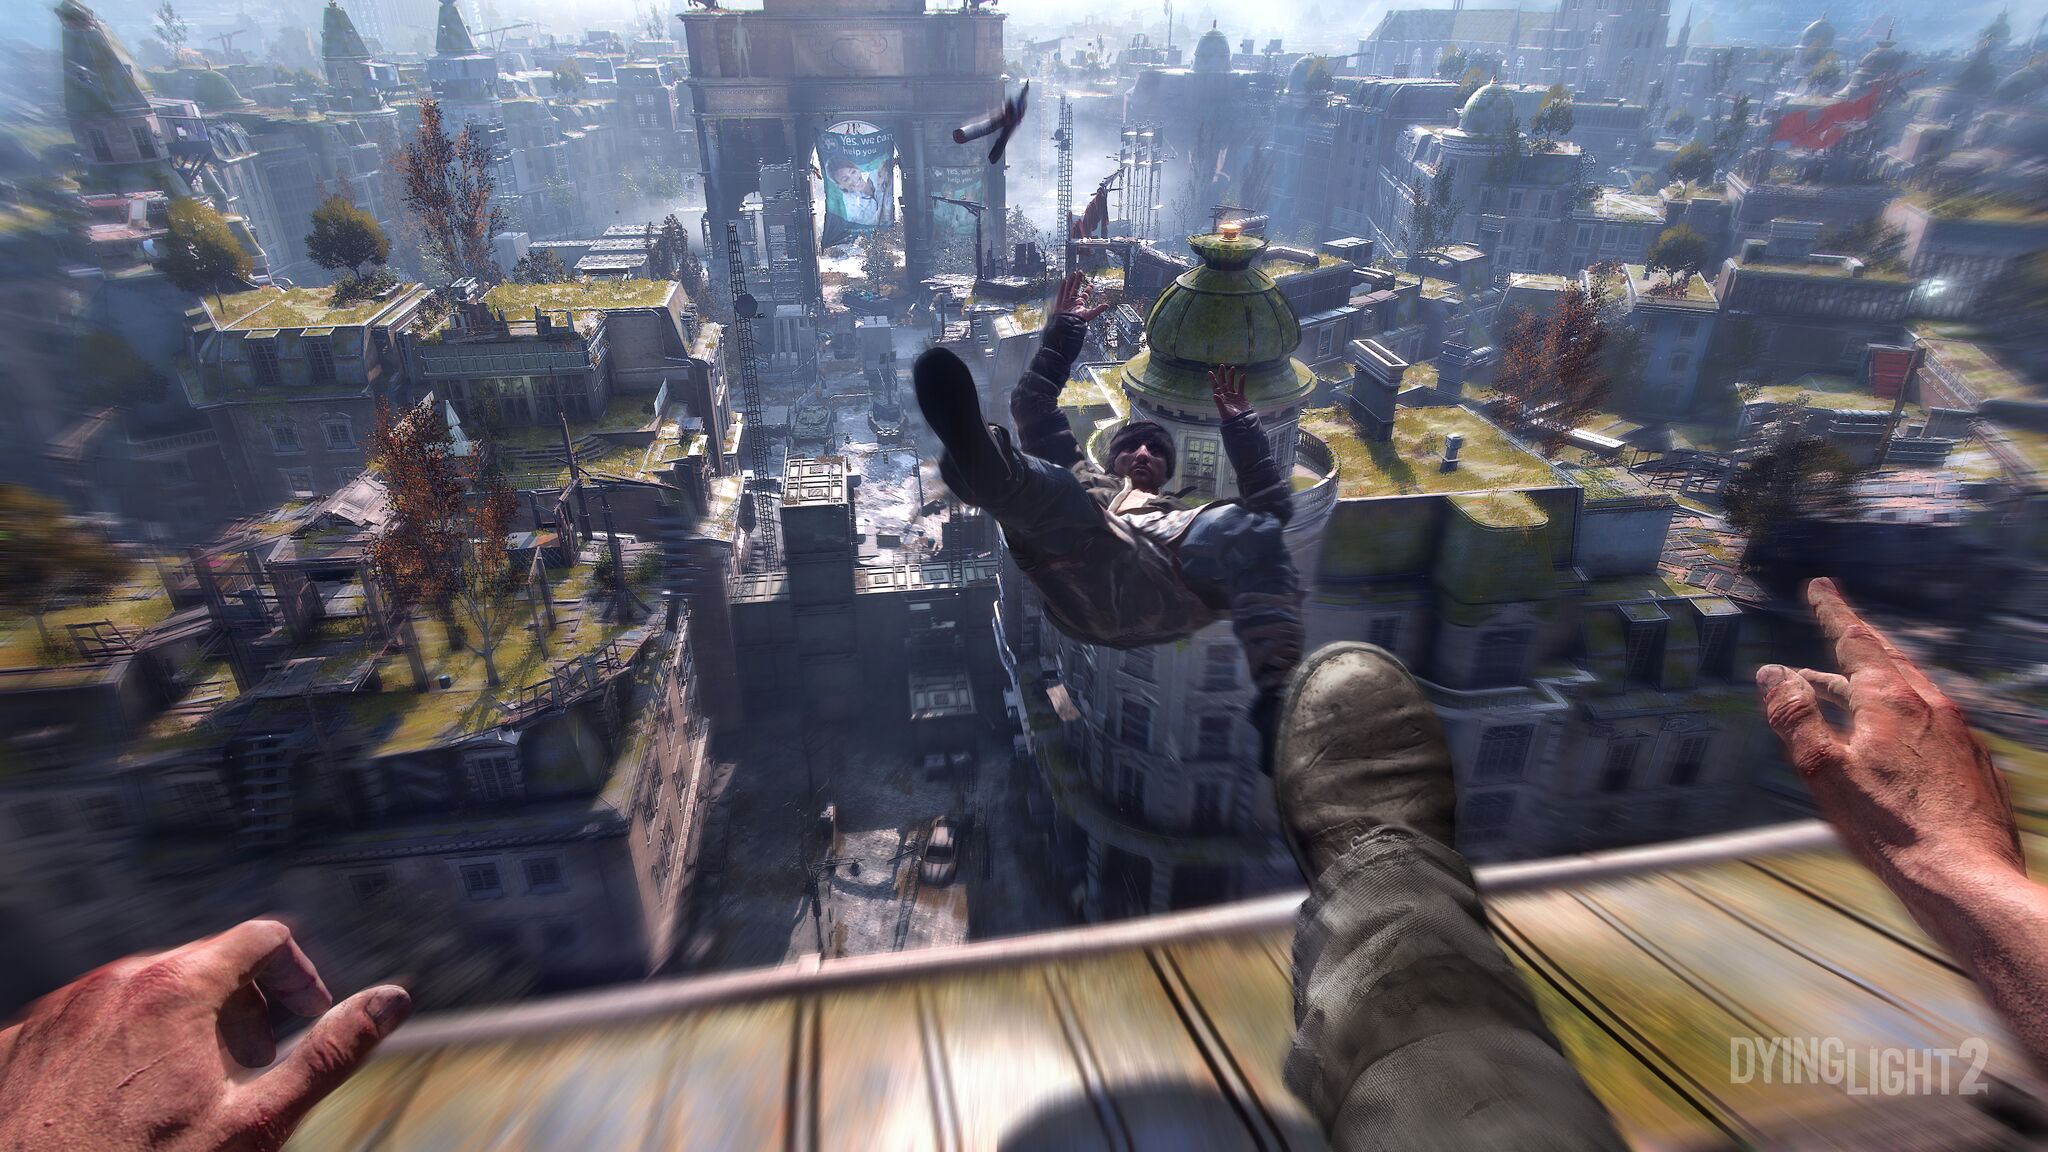 Dying Light nos muestra su extenso mapa en un gameplay inédito